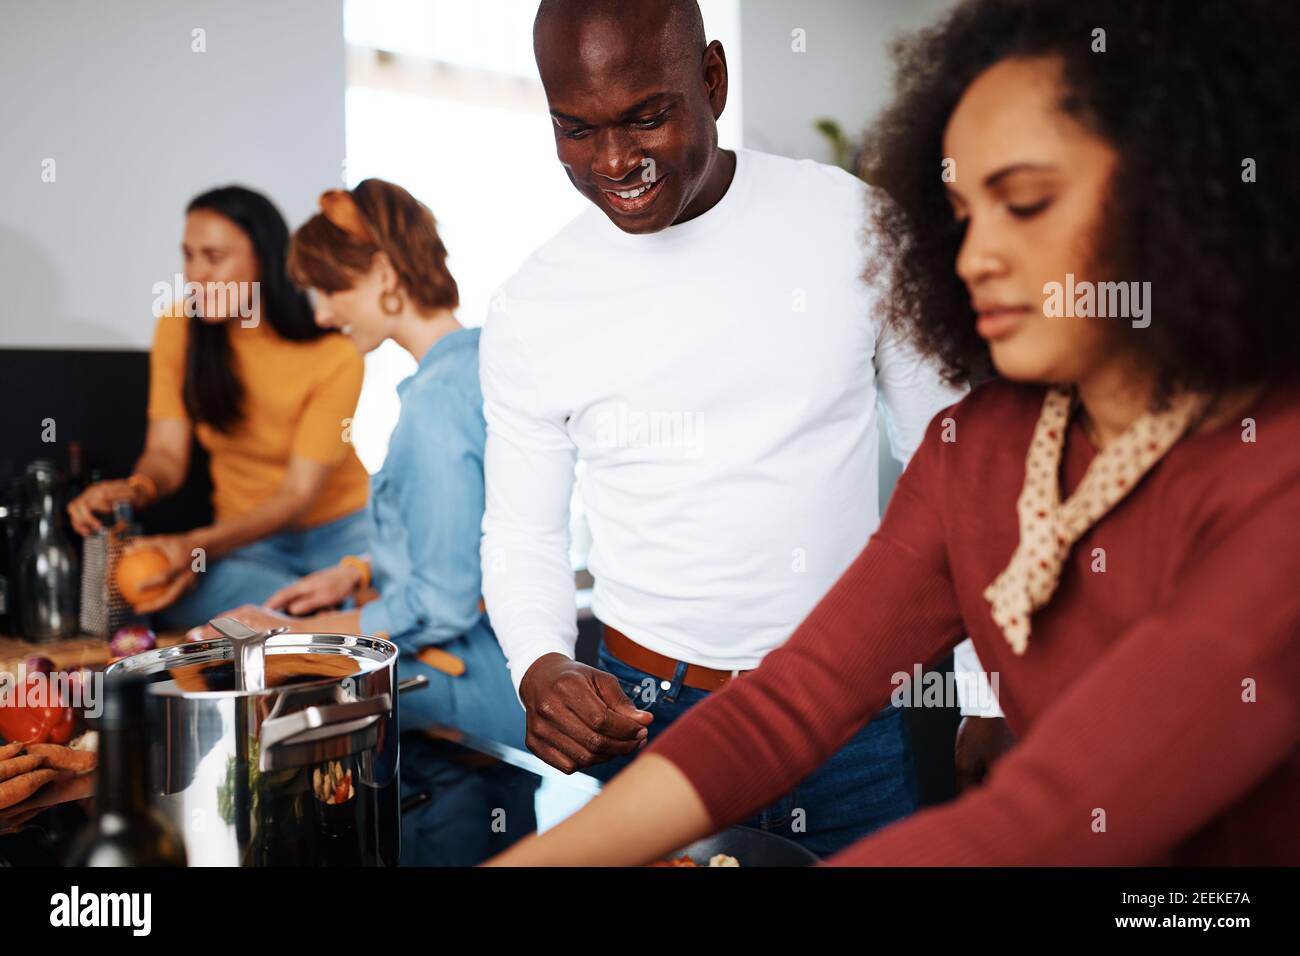 Smiling young African American man helping his friend with cooking while preparing for a dinner party with friends Stock Photo